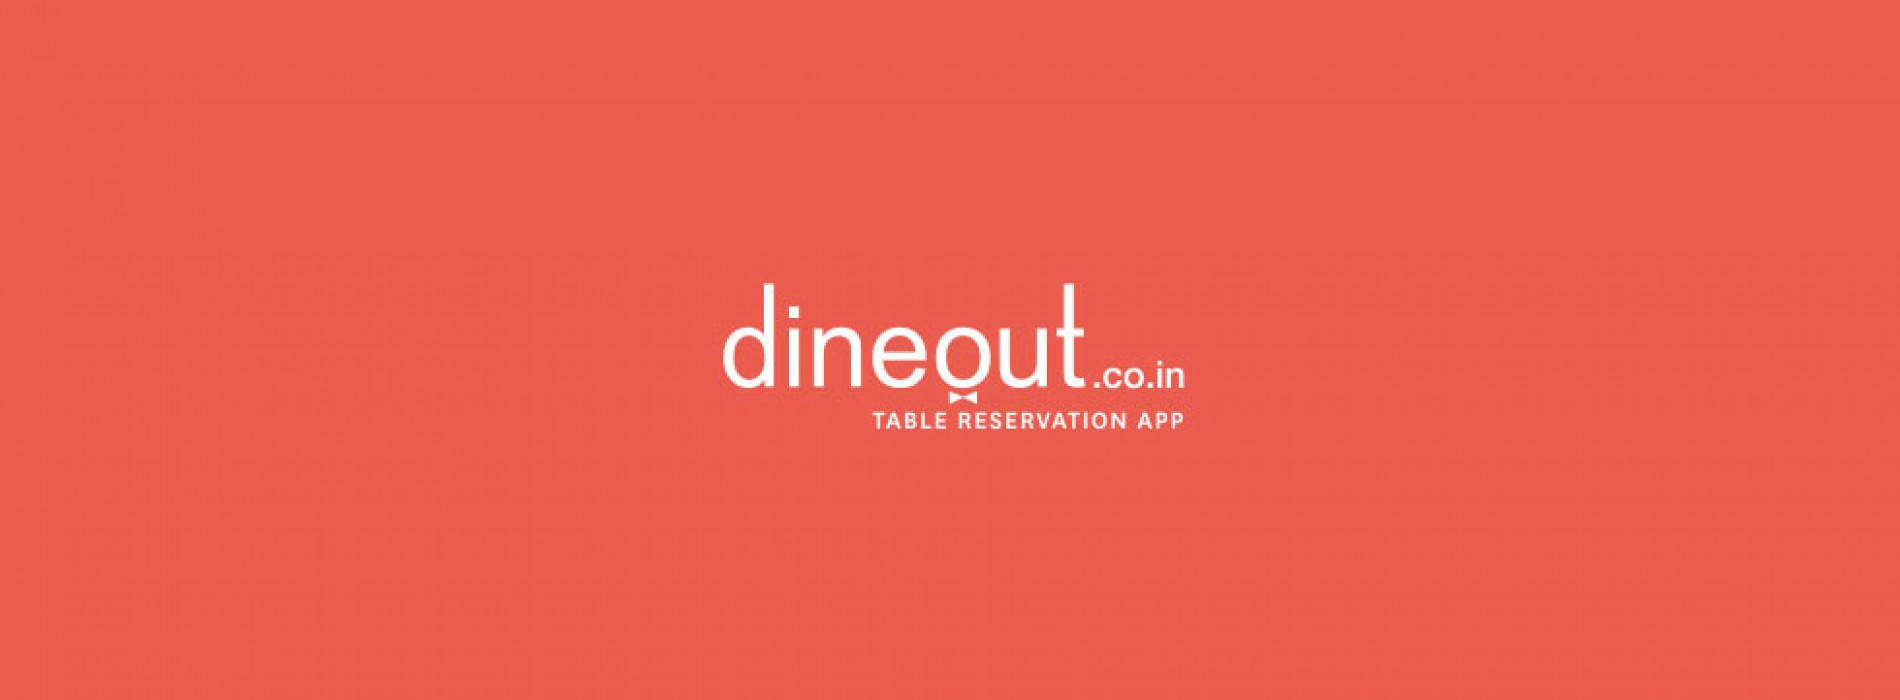 Dineout brings more choices to the Indian diner. Expands the industry.